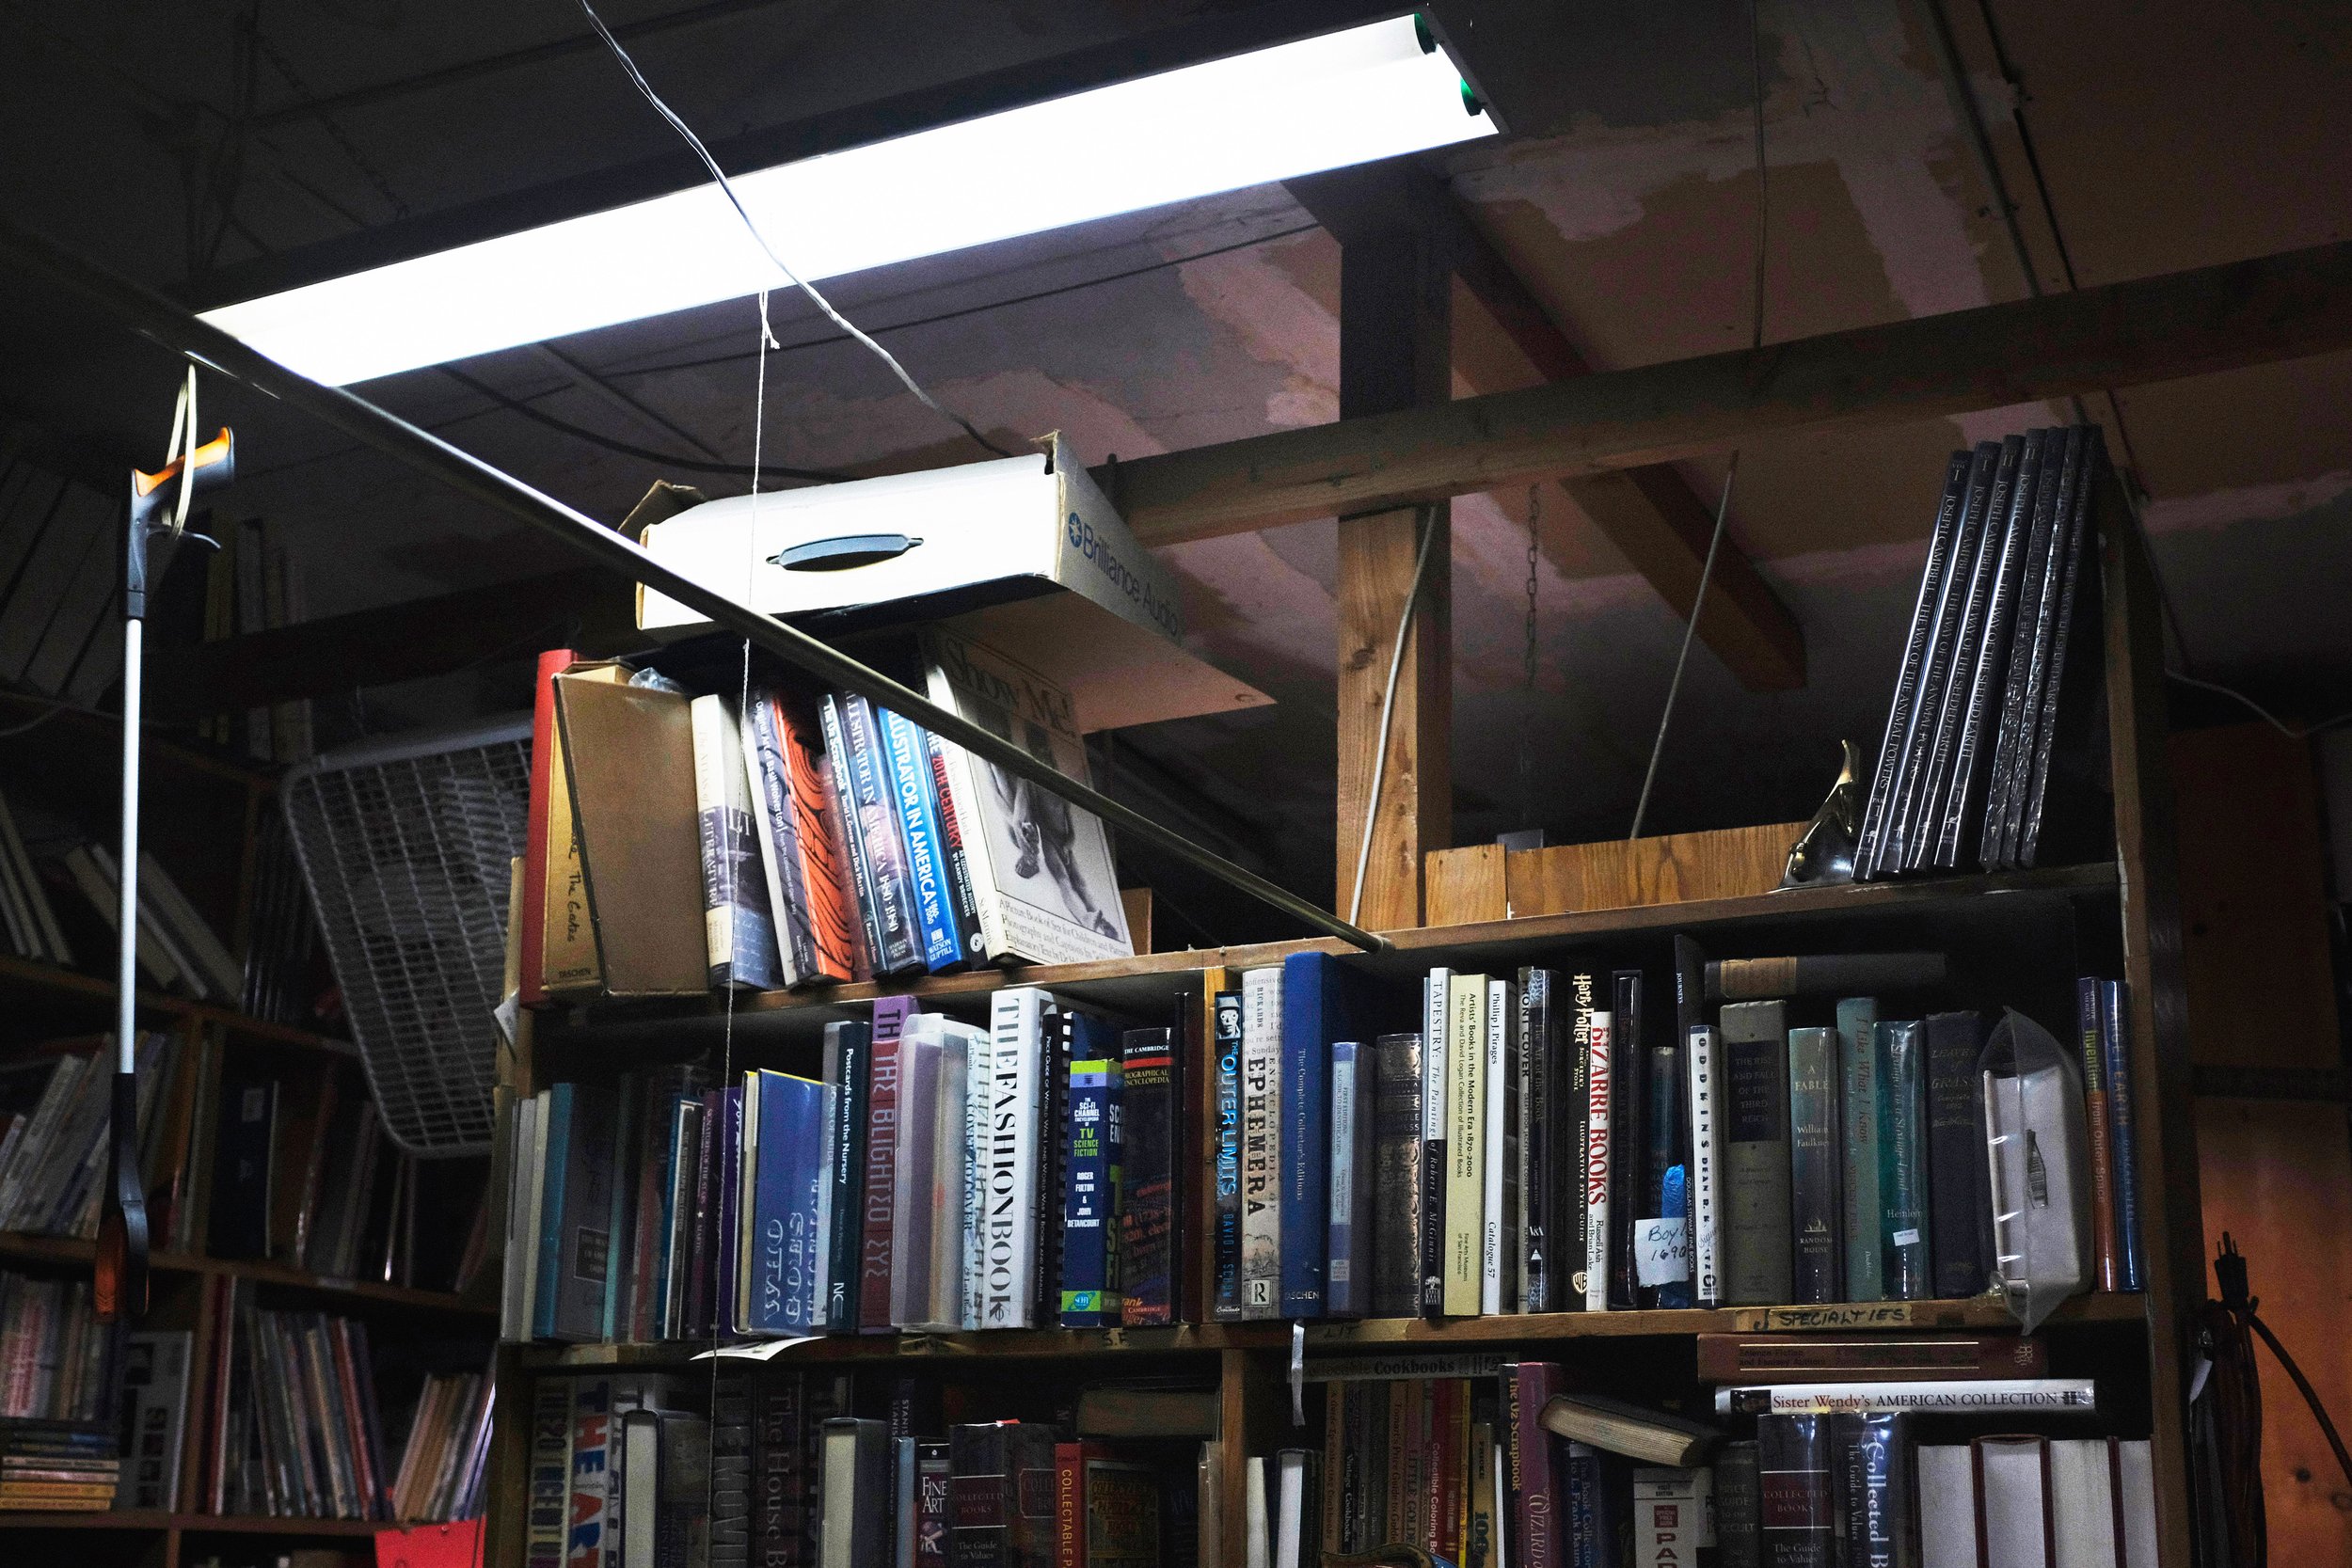  A fluorescent light shines down onto a shelveed section of rare books in the back of Bargain Books in Van Nuys, Los Angeles California on October 15, 2022 (Anna Sophia Moltke | The Corsair) 